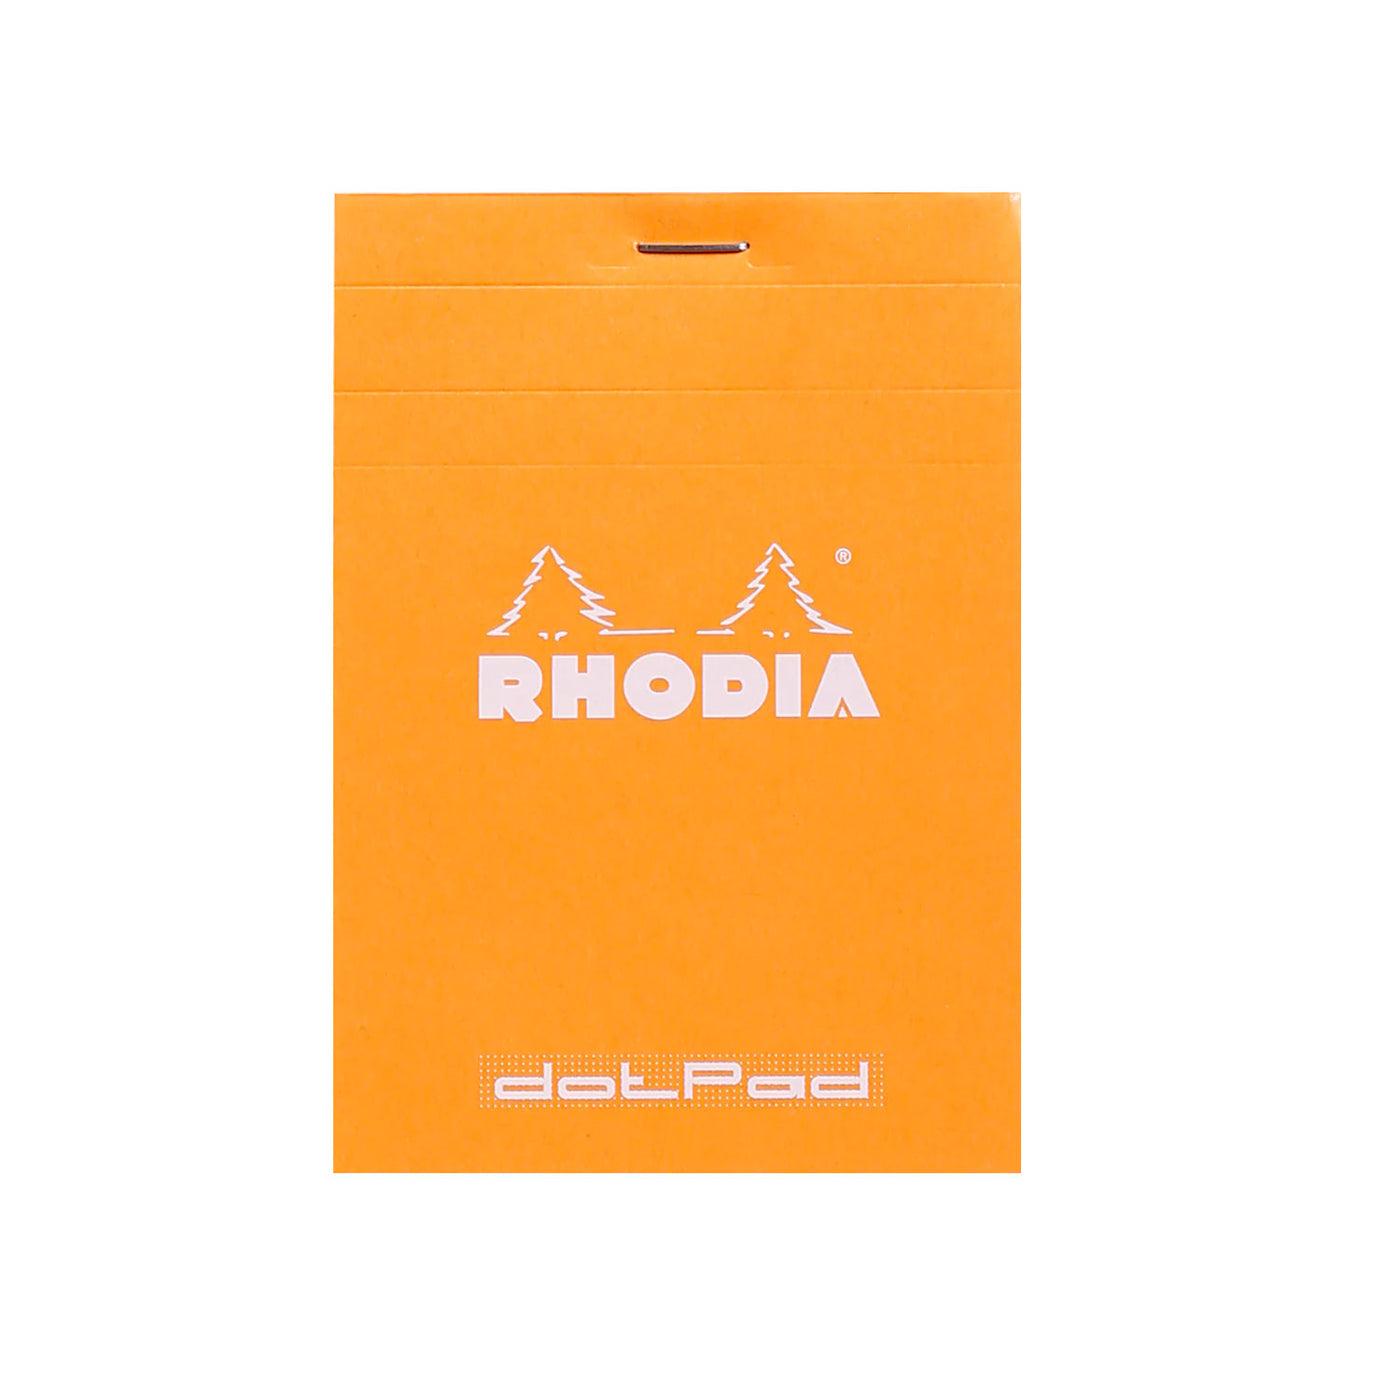 Rhodia No. 12 Orange Notepad - Small, Dotted 1